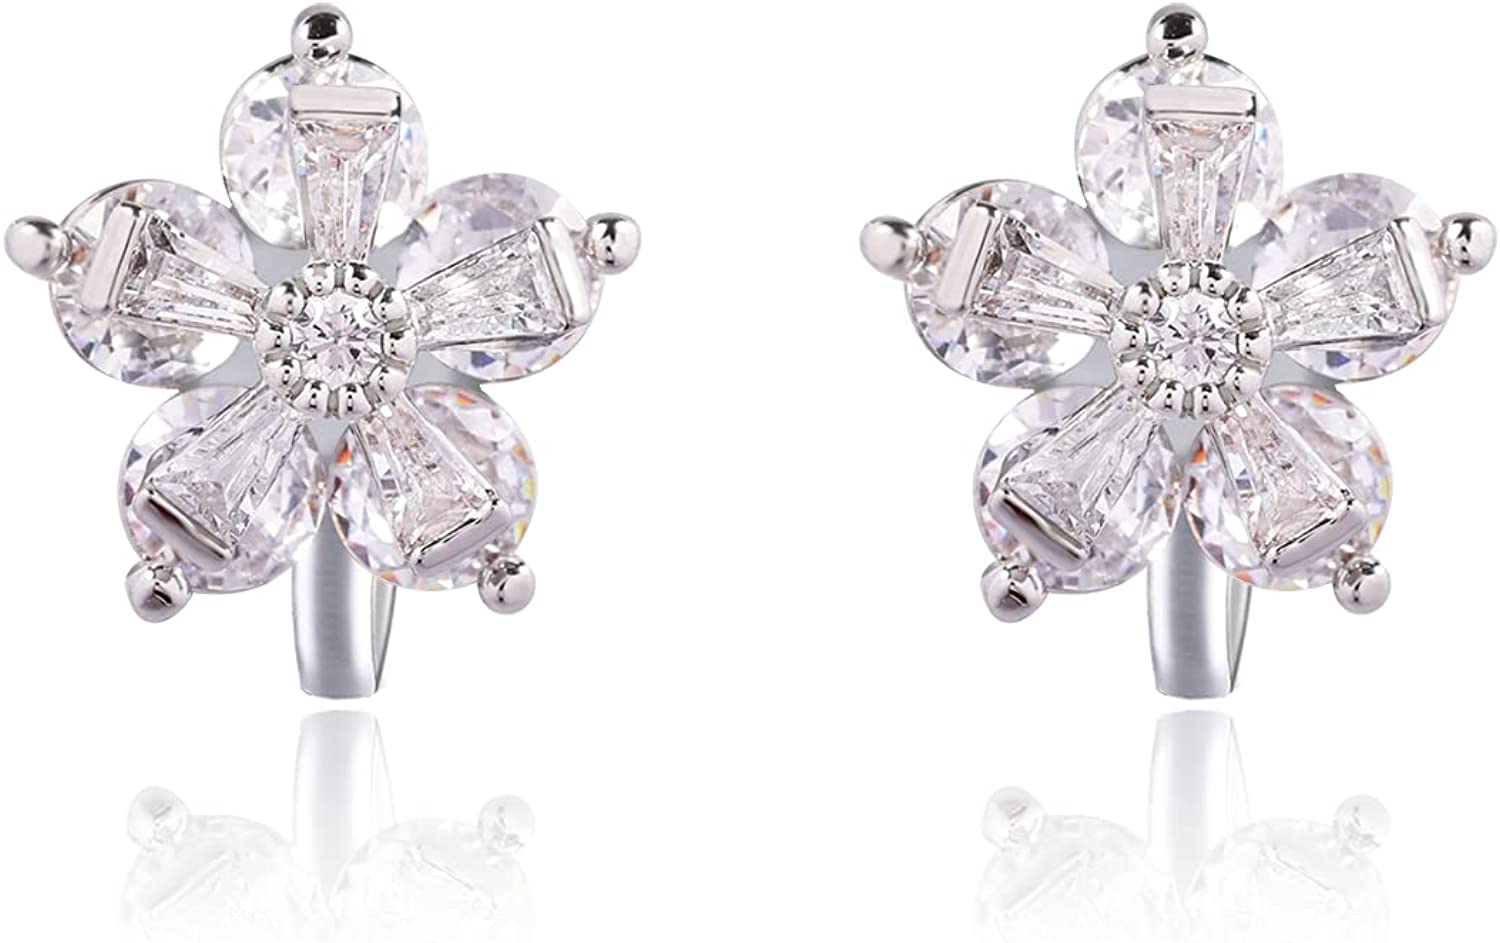 YOQUCOL Flower Snowflake Shape Cubic Zirconia Crystal Clip On Earrings Non Pierced Stud for Women Girls